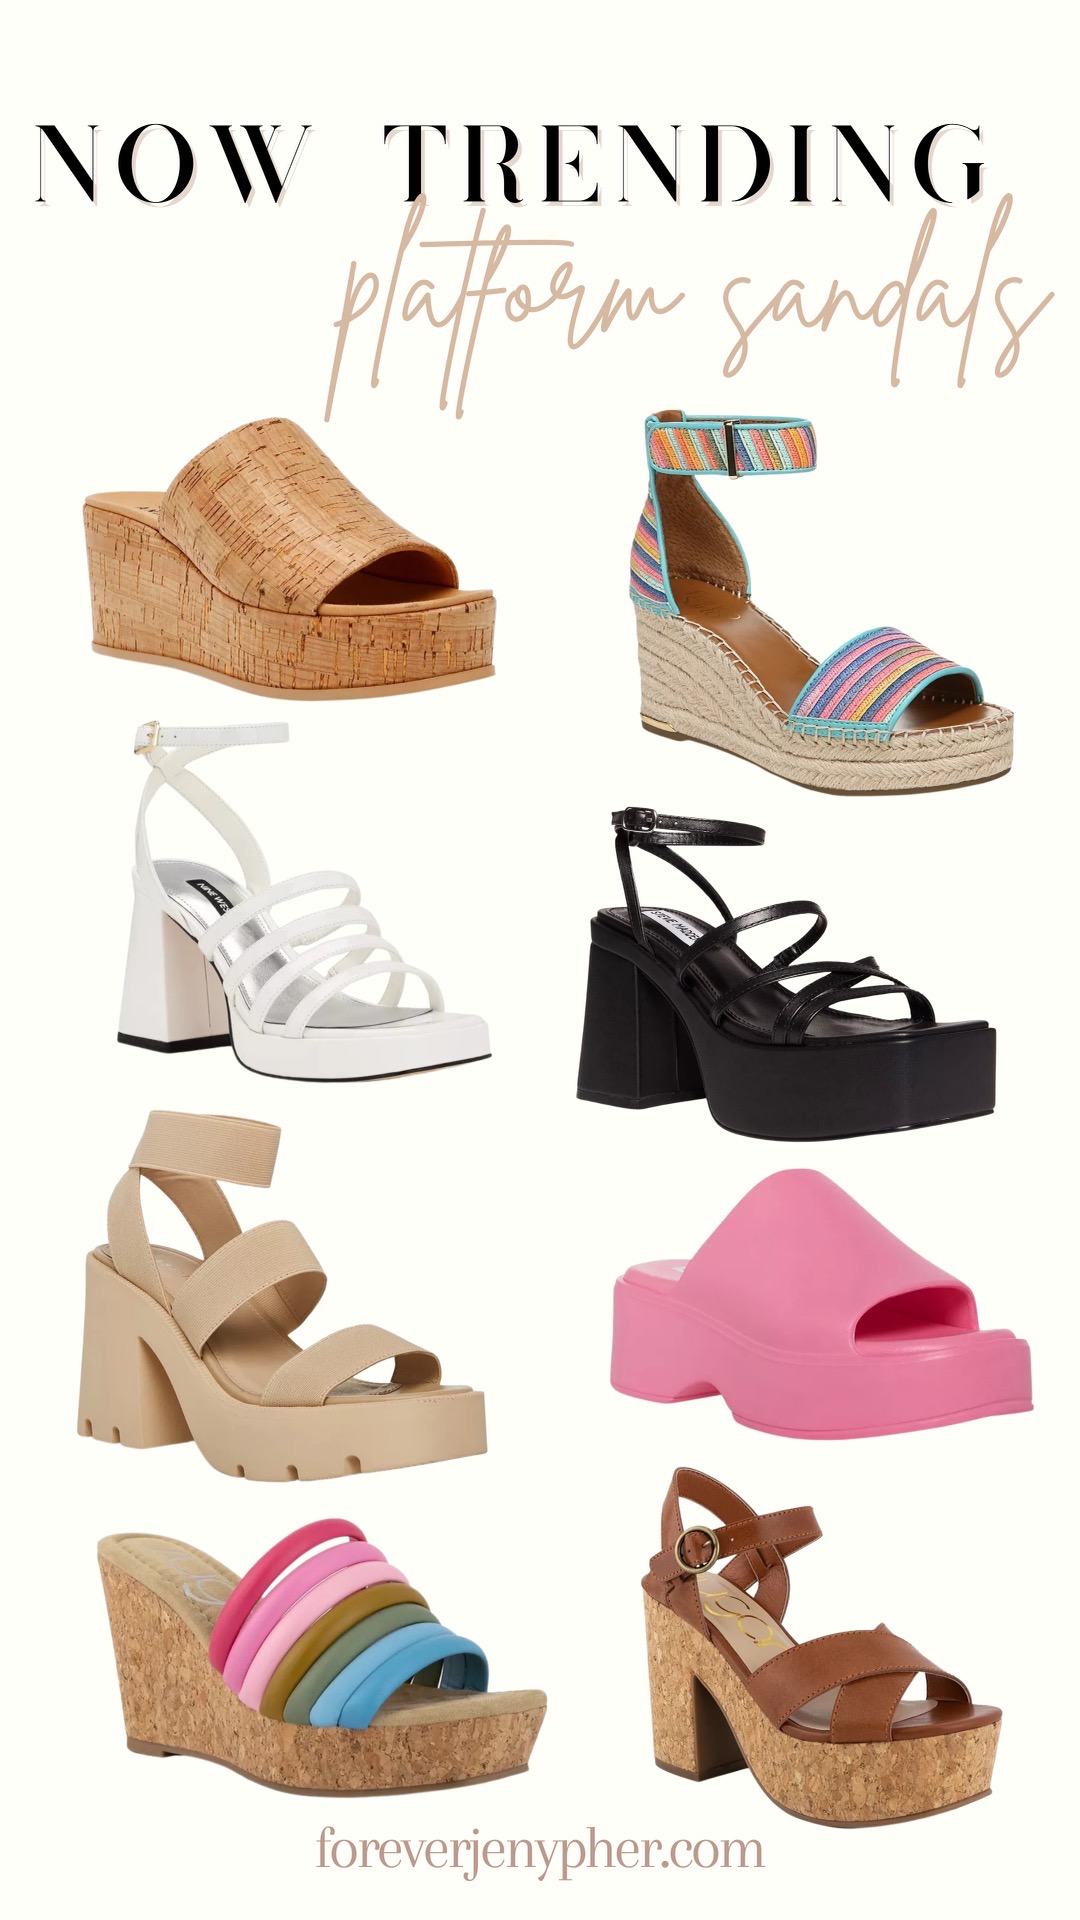 HOW TO STYLE TRENDY PLATFORM SANDALS FOR SPRING